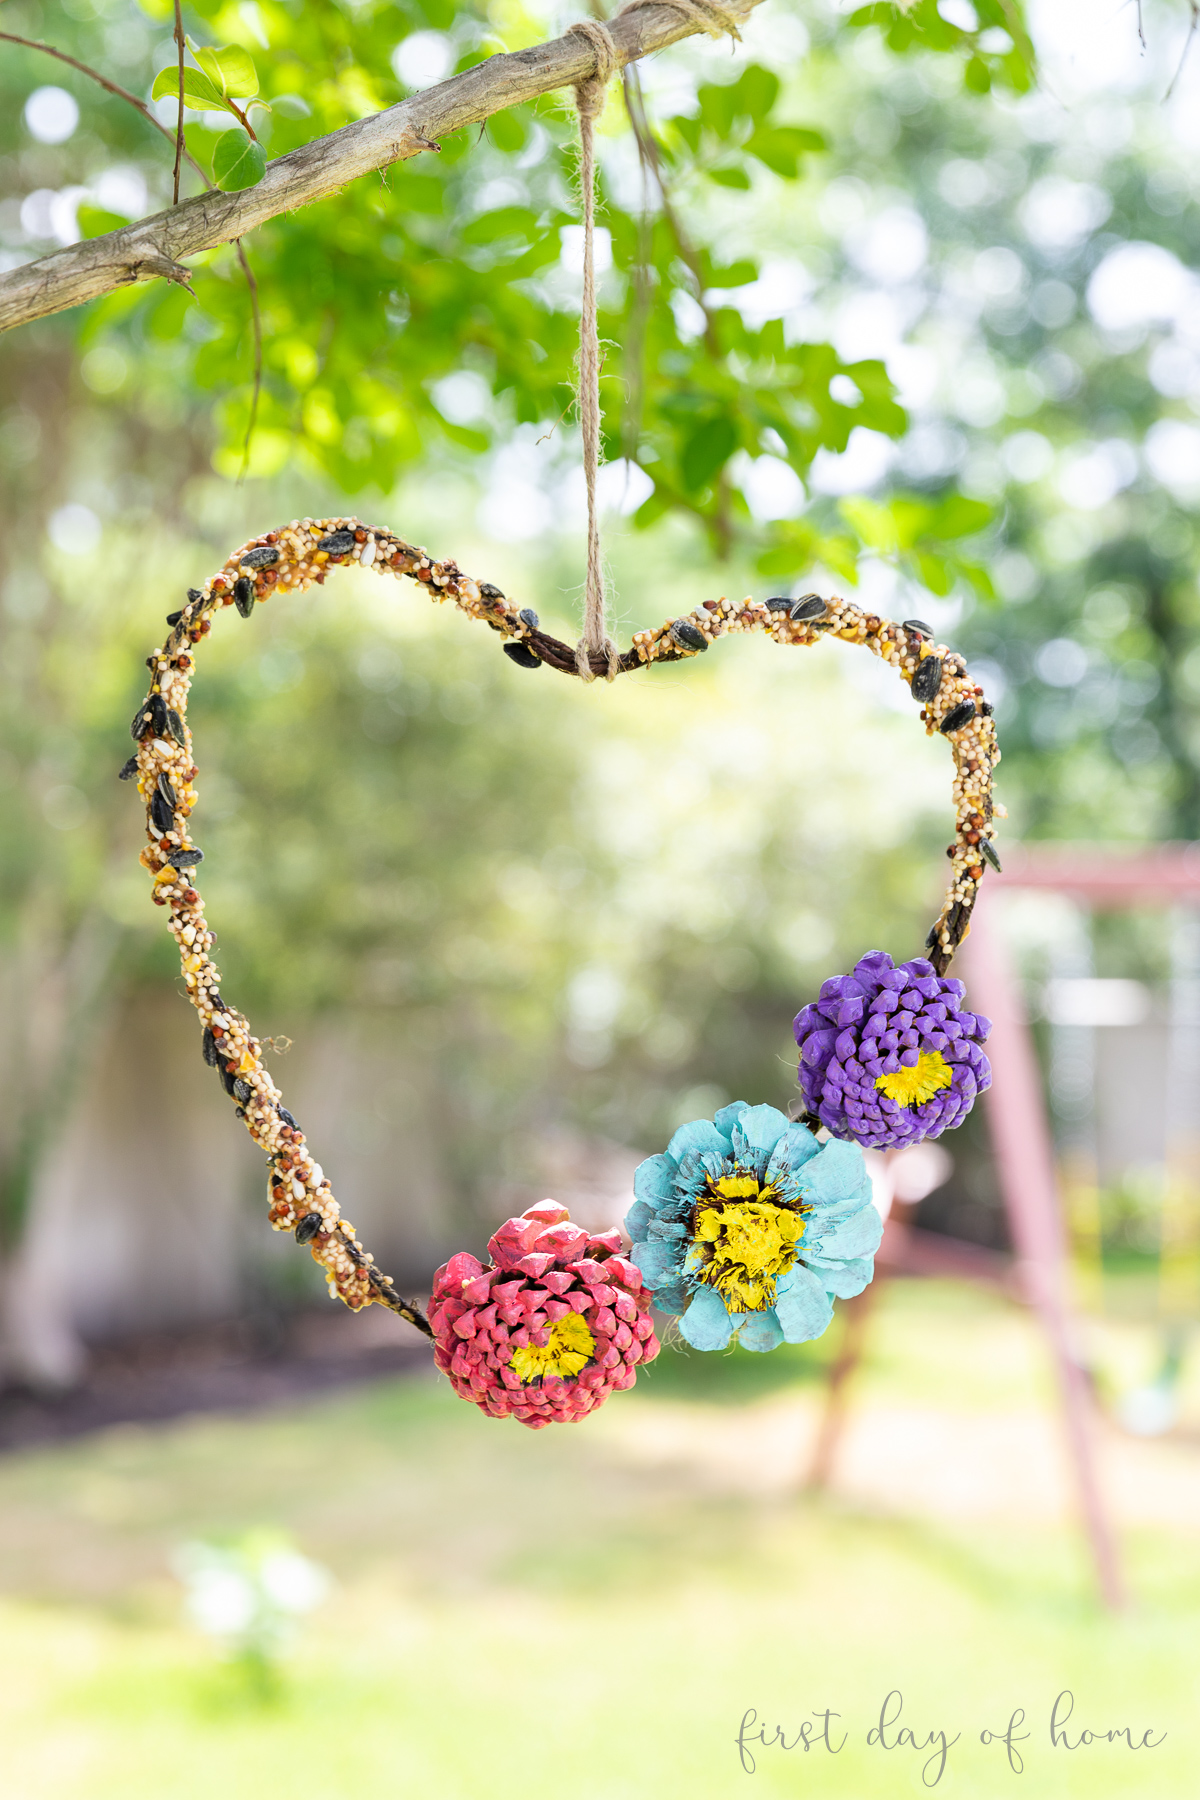 DIY bird feeder with painted pinecone accents hanging from tree branch